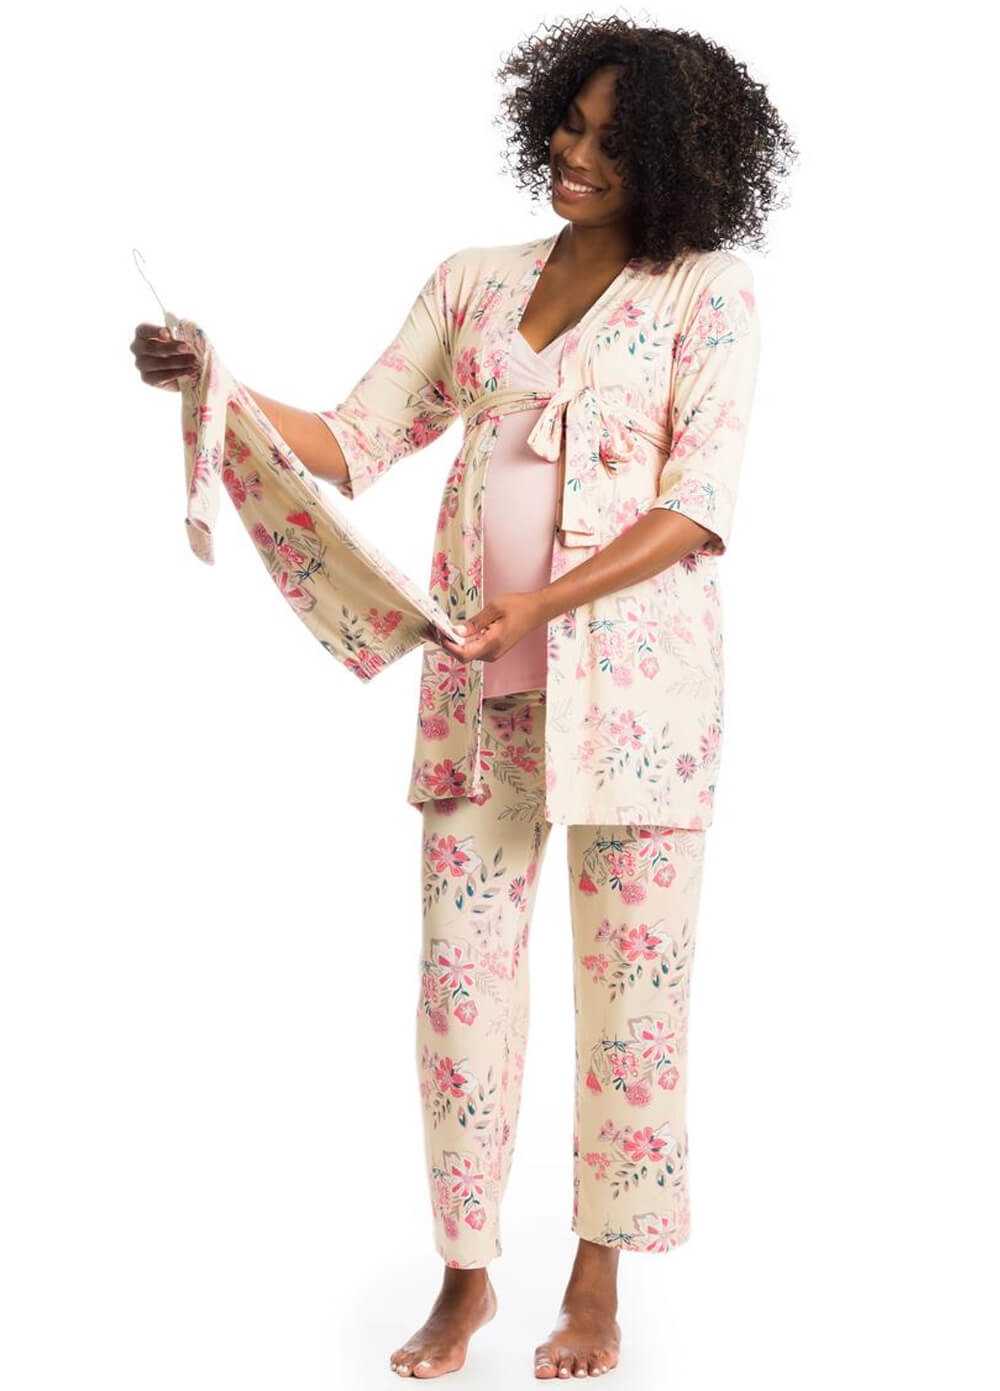 Everly Grey - Analise Mommy & Me PJ Gift Set in Wild Flower